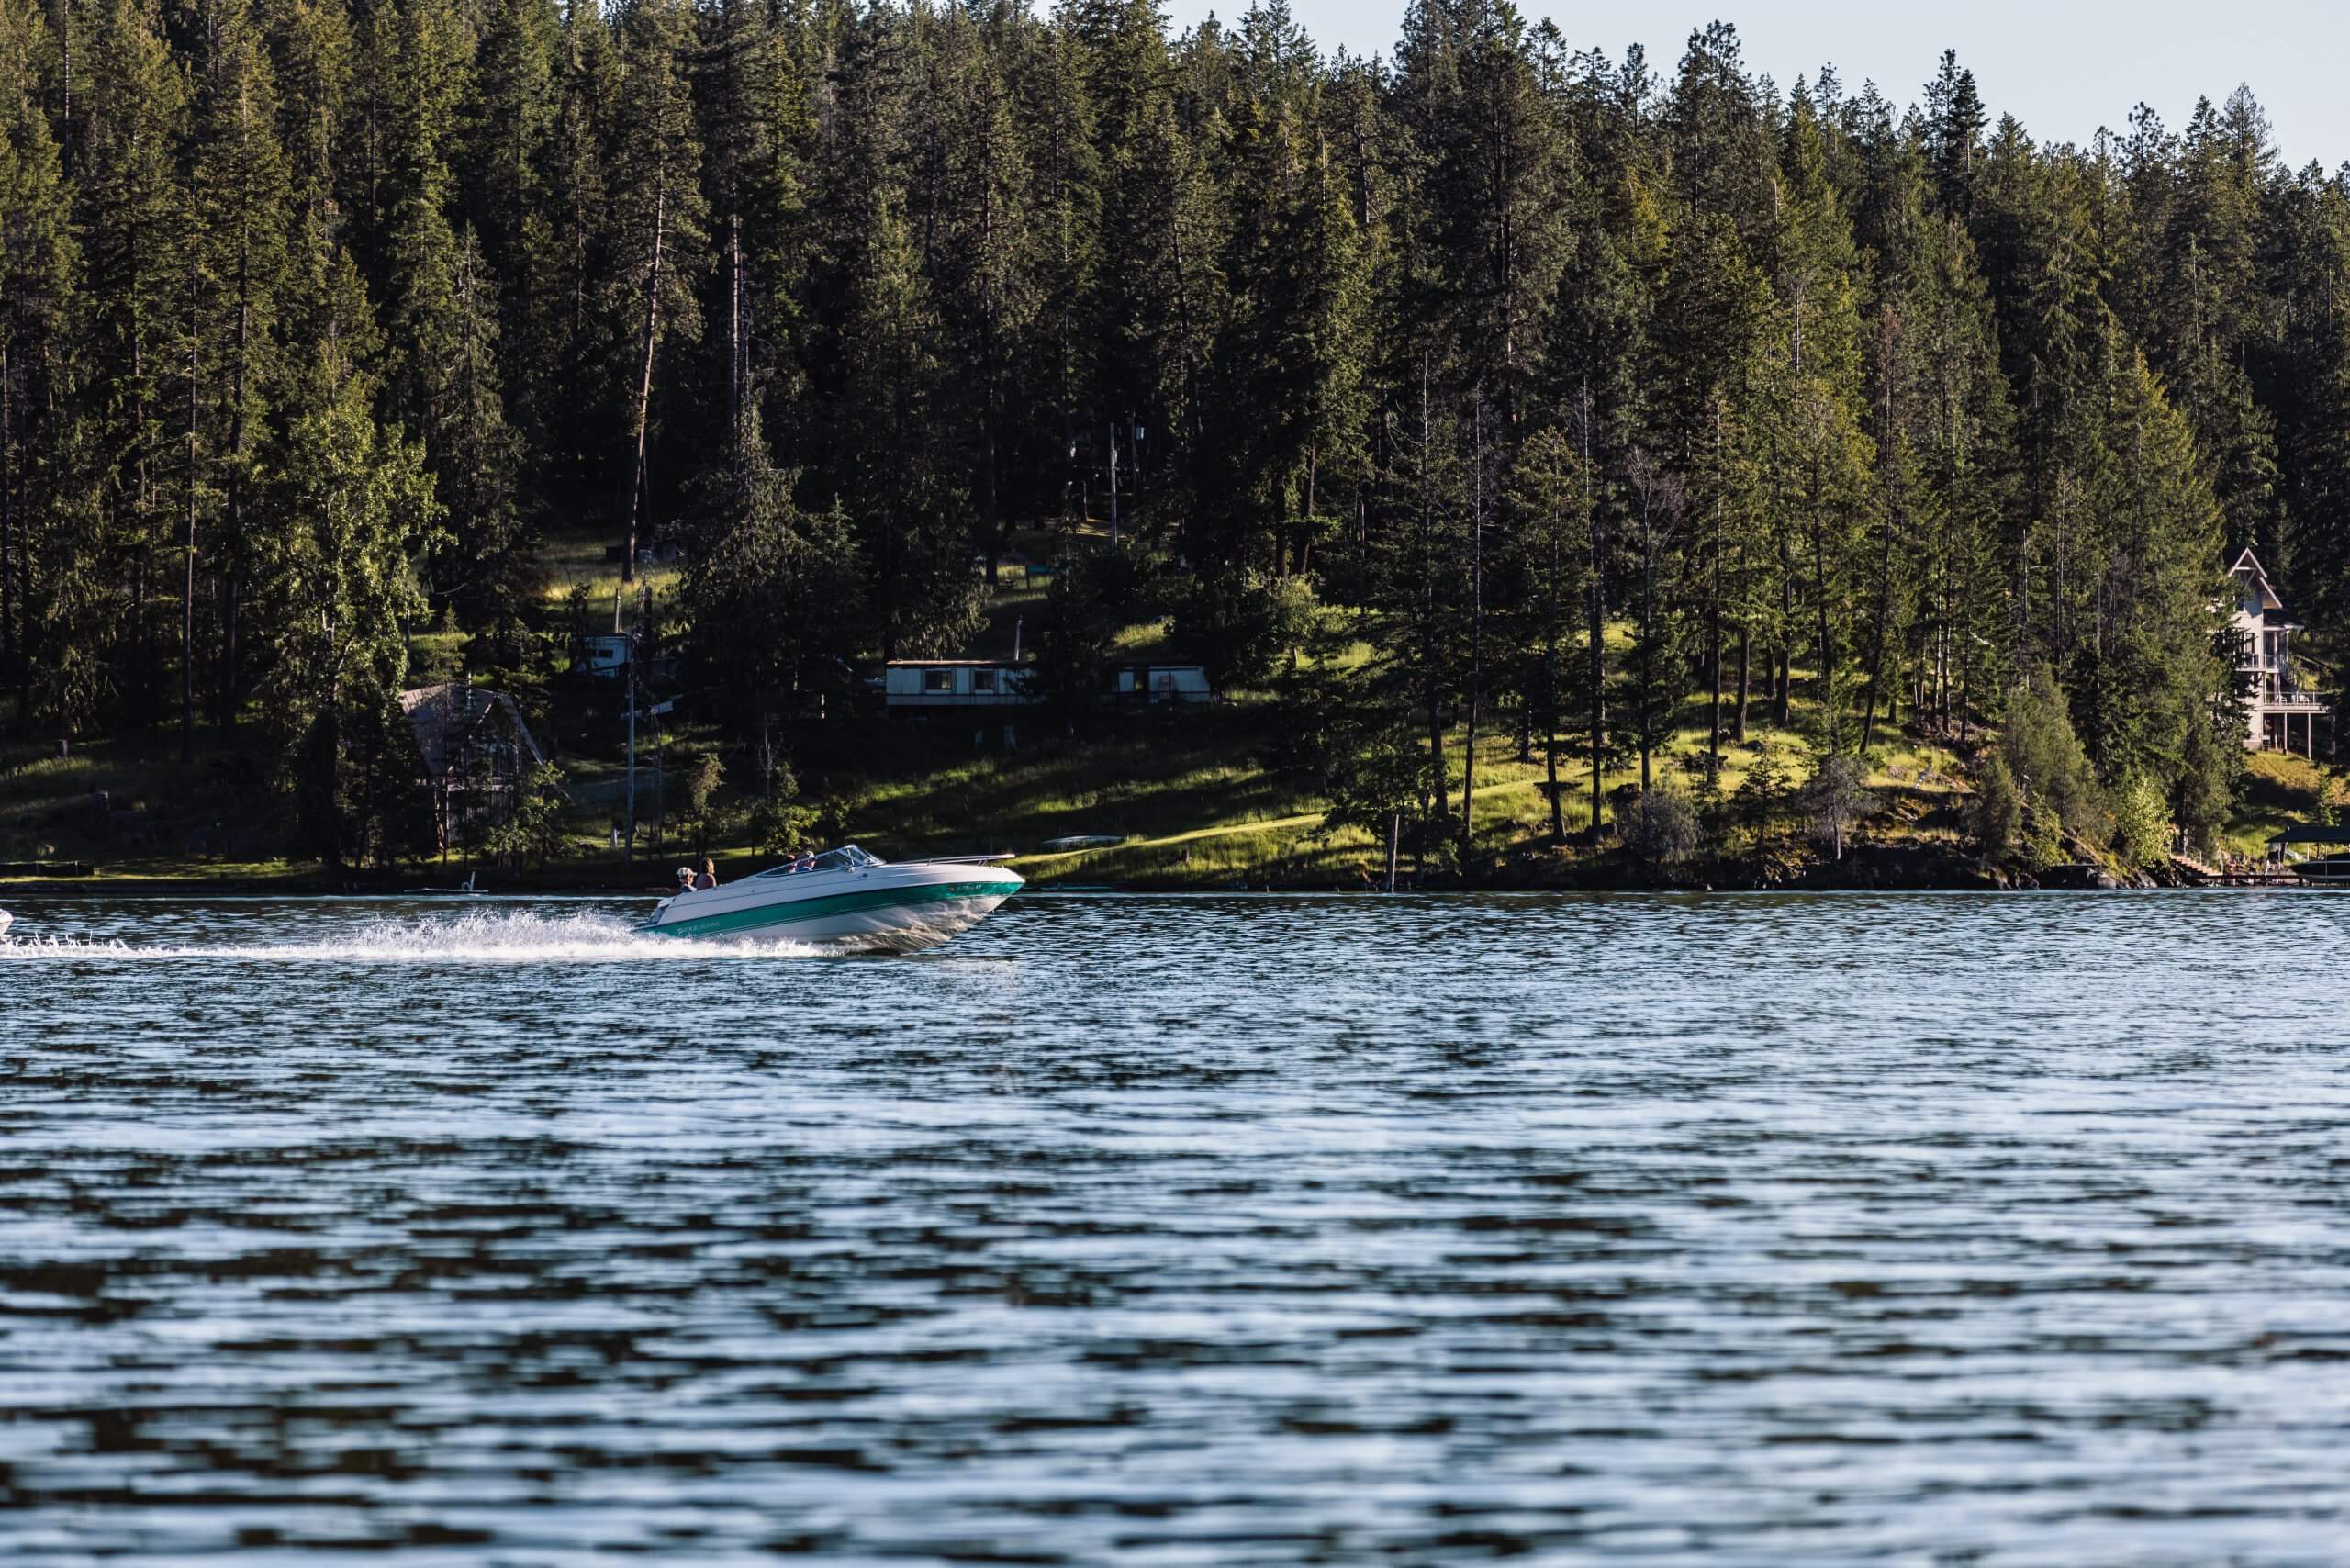 A person drives a speedboat on a lake.